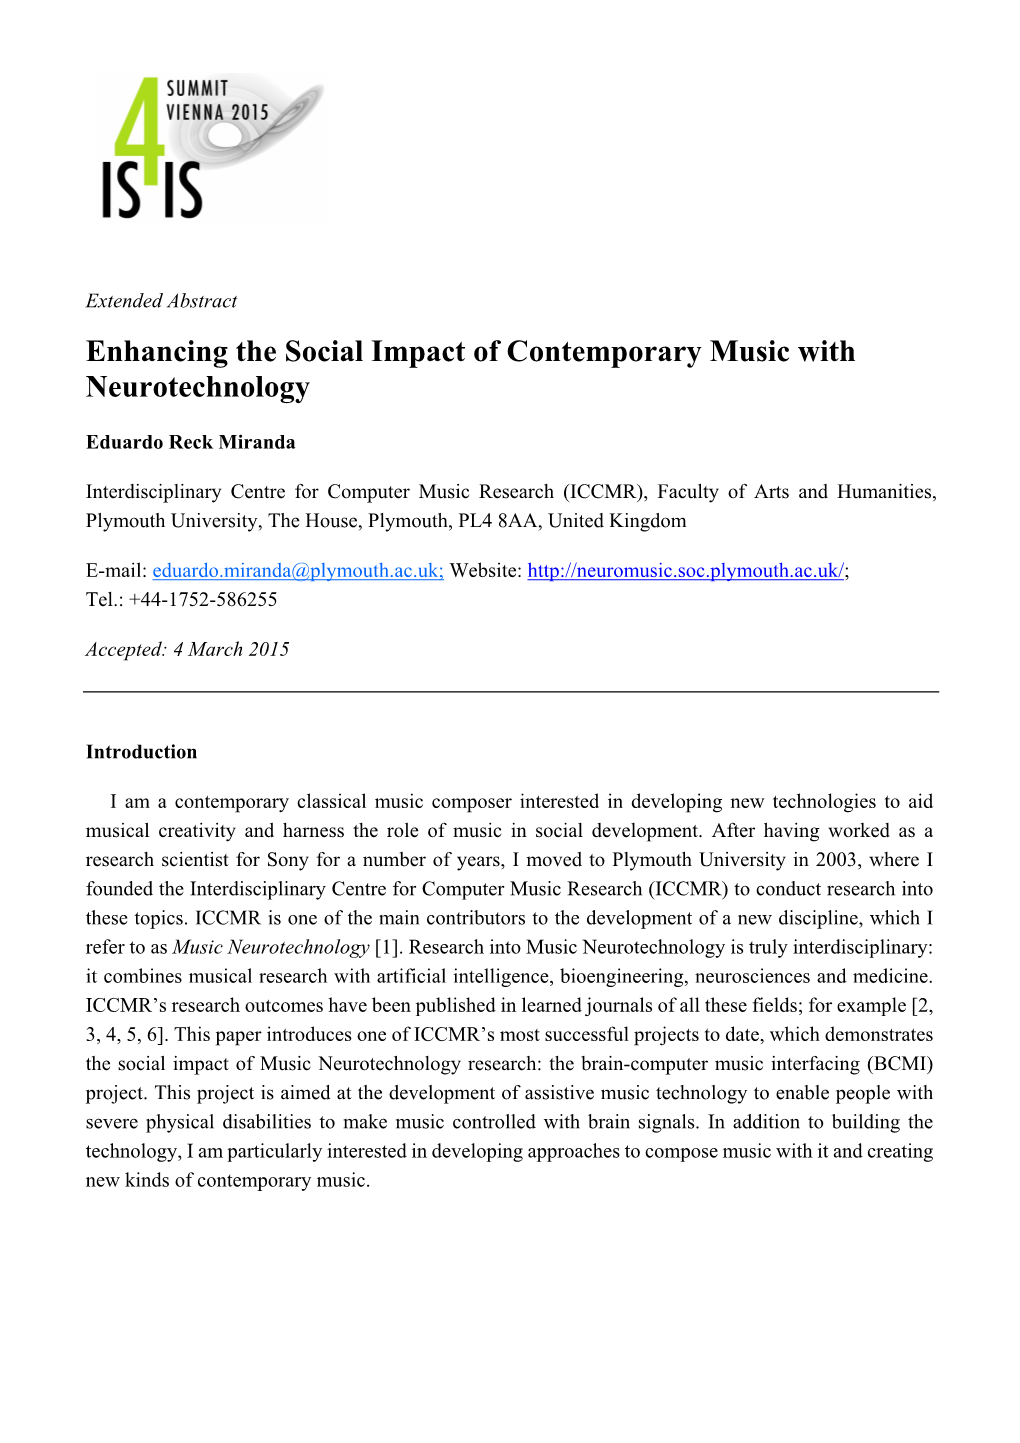 Enhancing the Social Impact of Contemporary Music with Neurotechnology